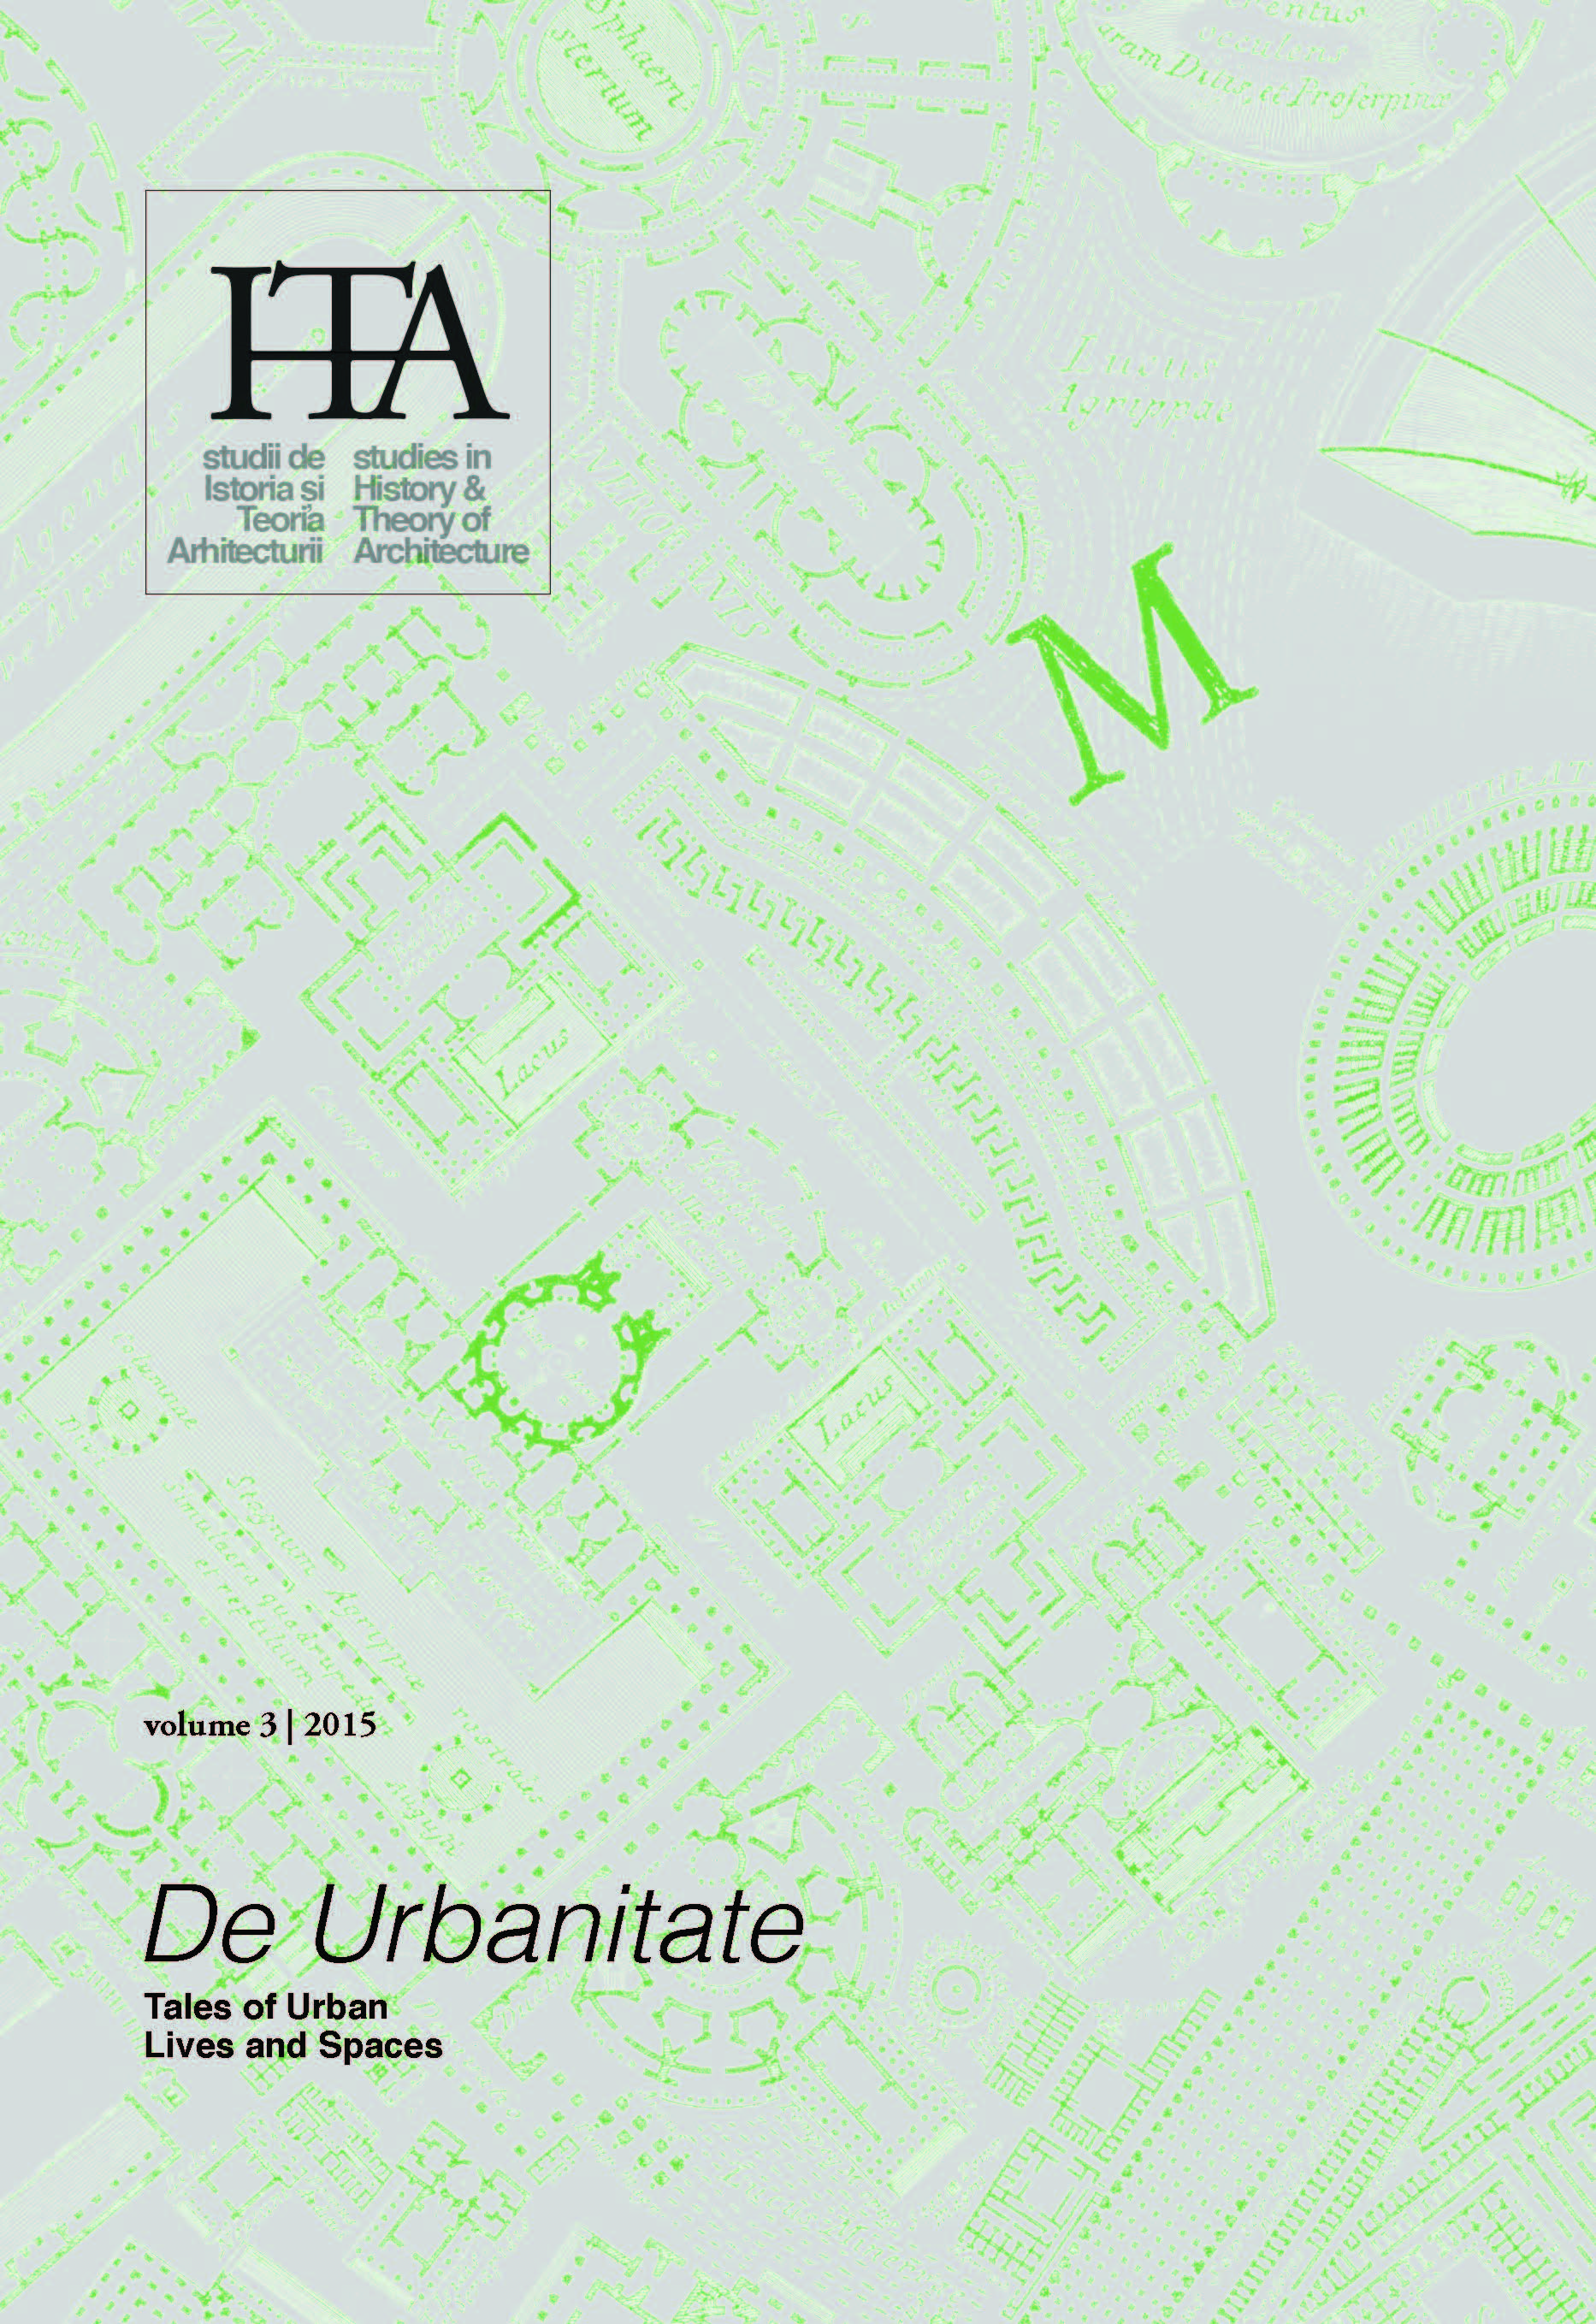 Changing Perspectives of Urbanity during Socialism and after: the Case of Two Neighborhoods in Skopje Cover Image